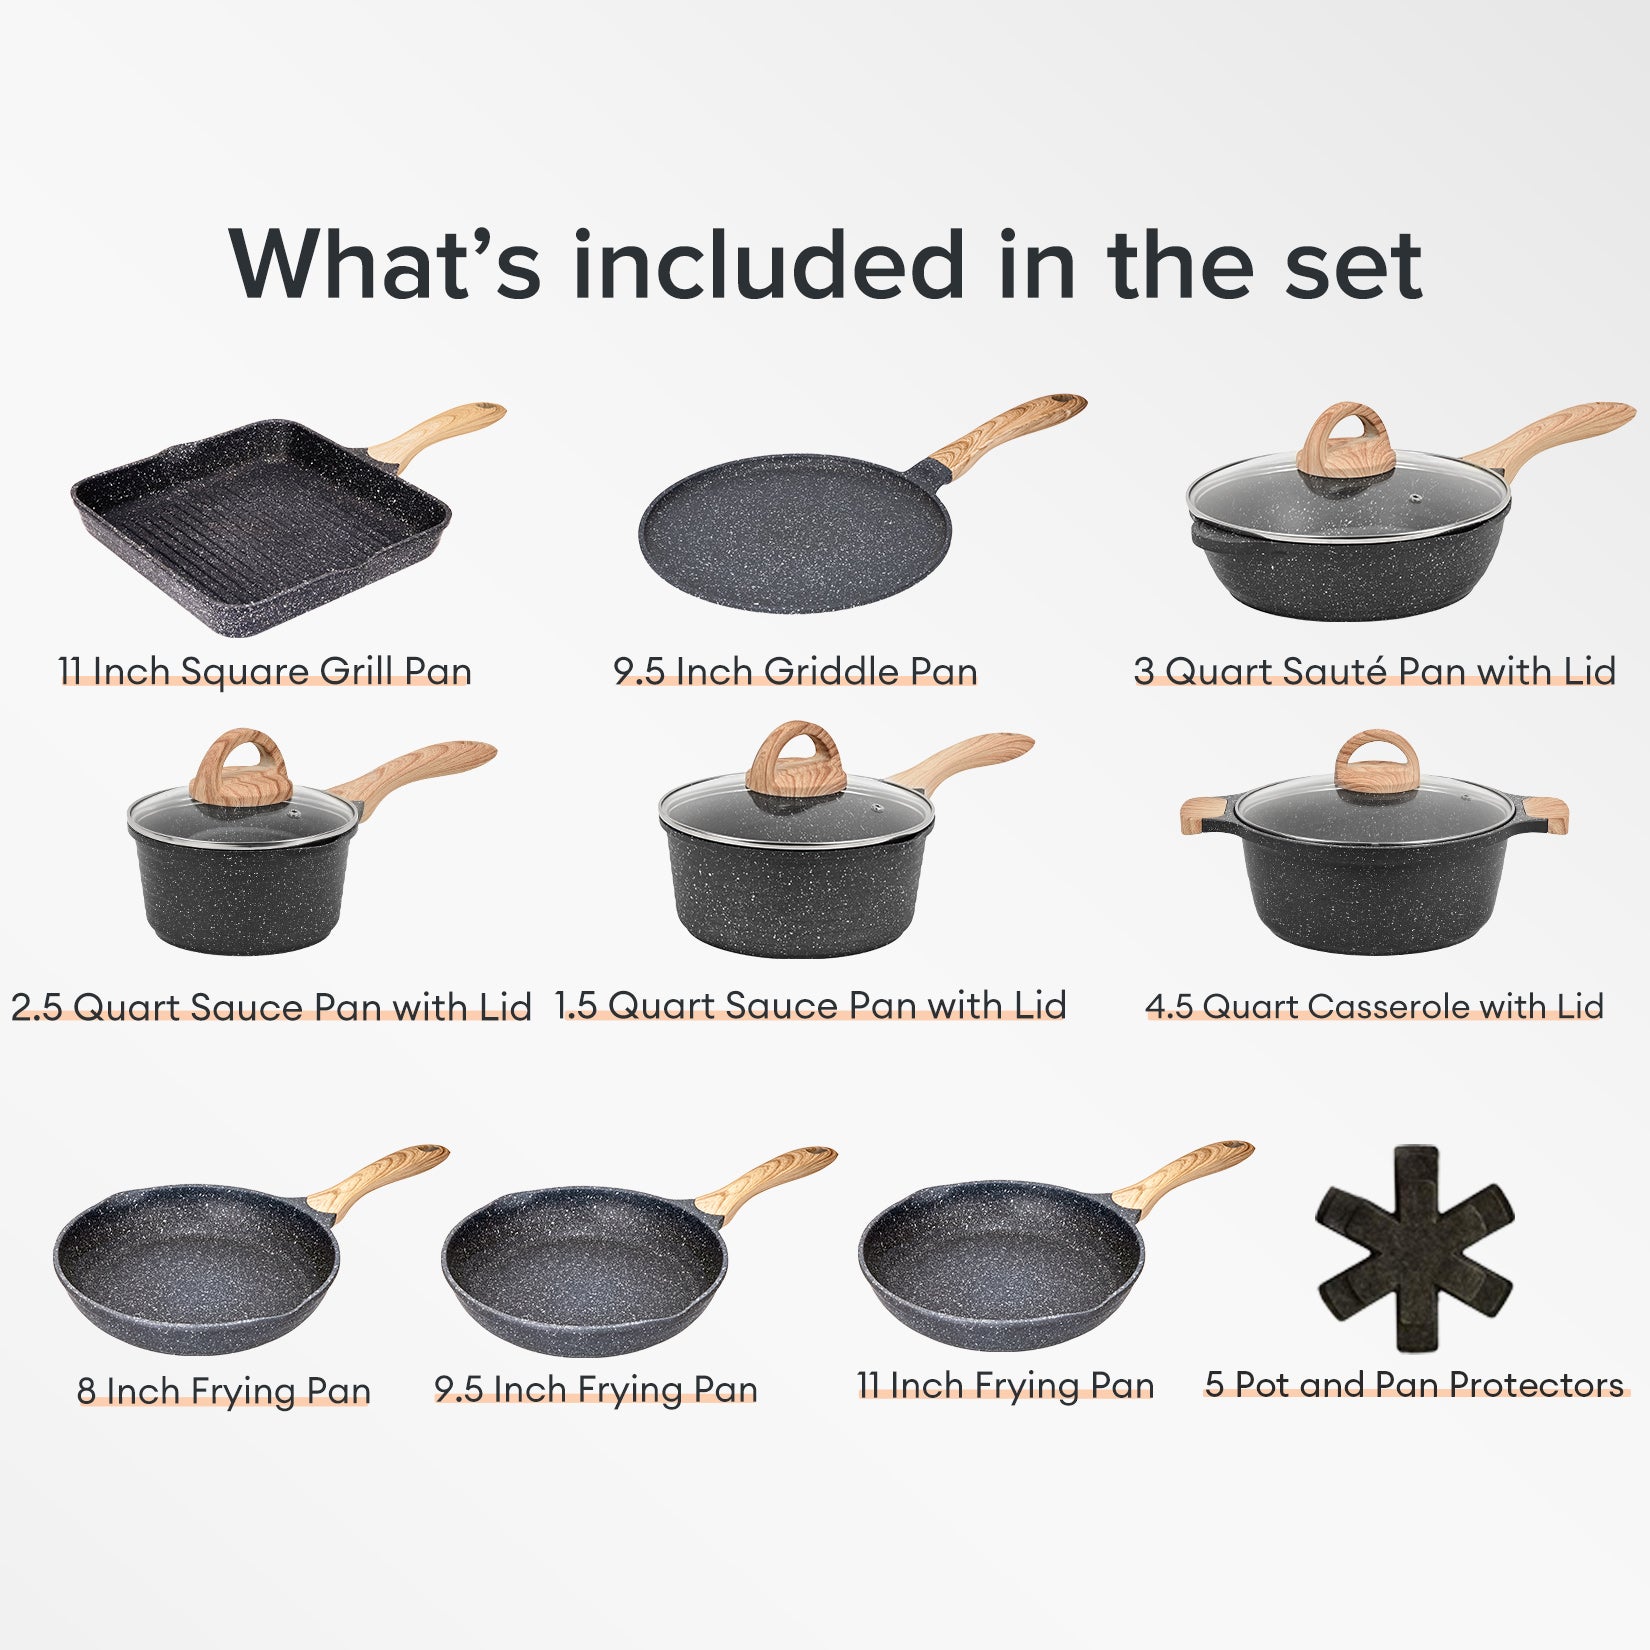 JEETEE 1.5 Quart Sauce Pan with Lid, Non Stick Small Pot with German  Granite Coating, Masterclass Granite Stone Cookware Sauce Pot for Cooking